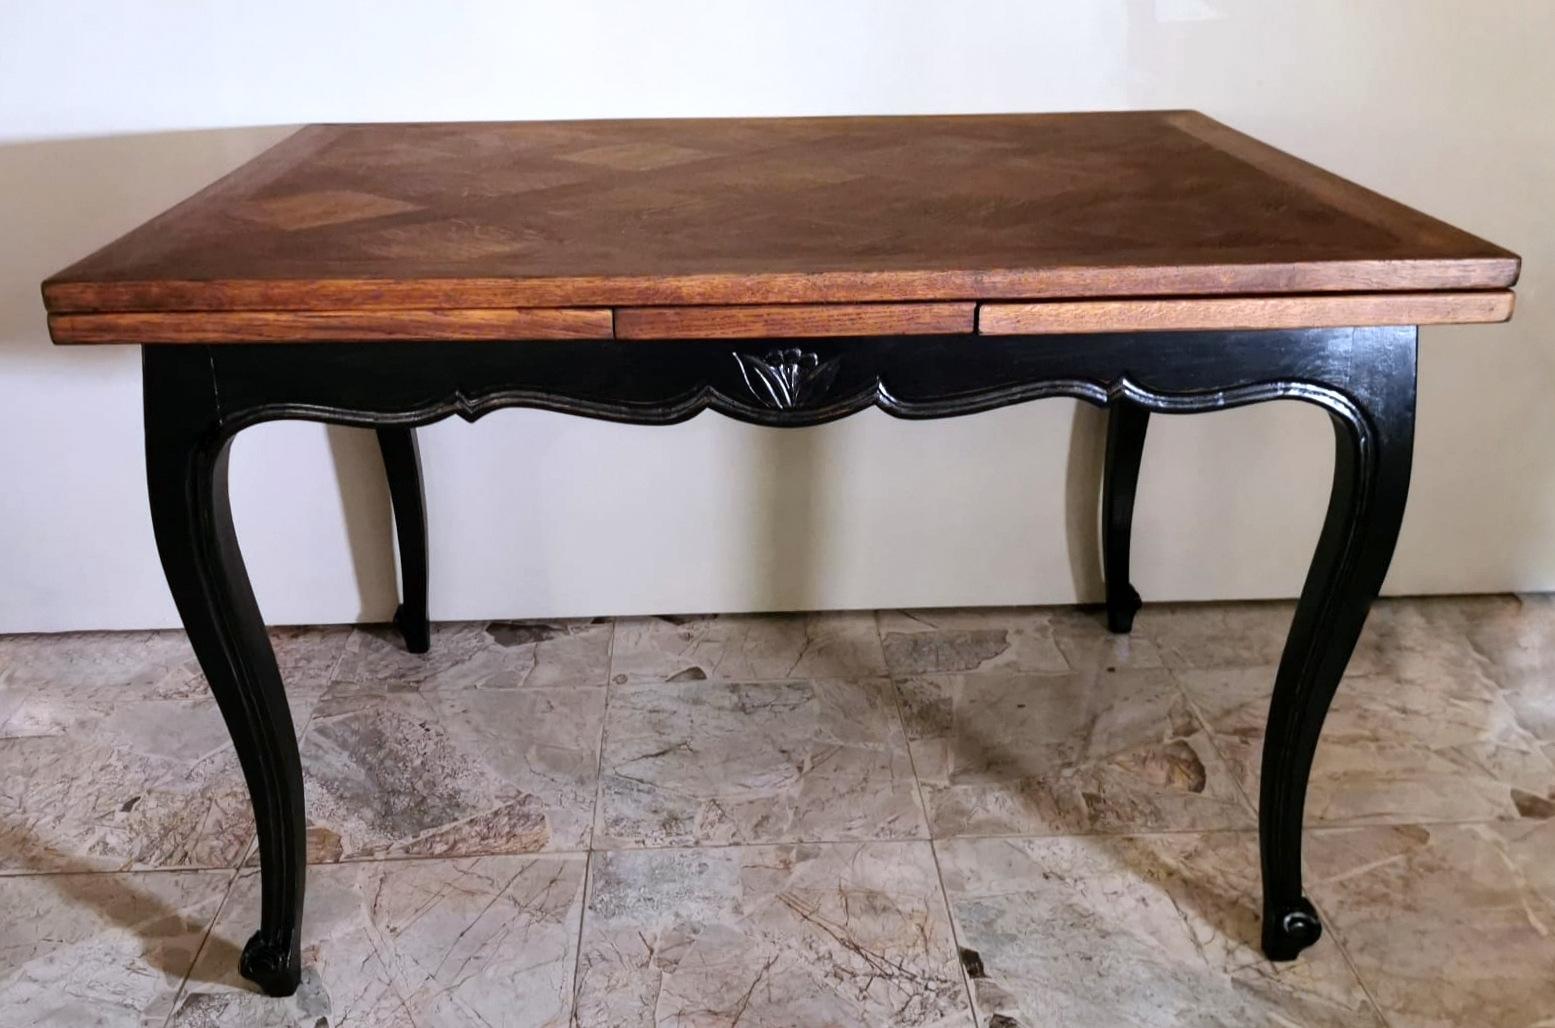 We kindly suggest that you read the whole description, as with it we try to give you detailed technical and historical information to ensure the authenticity of our items. French extending table in Provencal style made of oak wood; the top has a